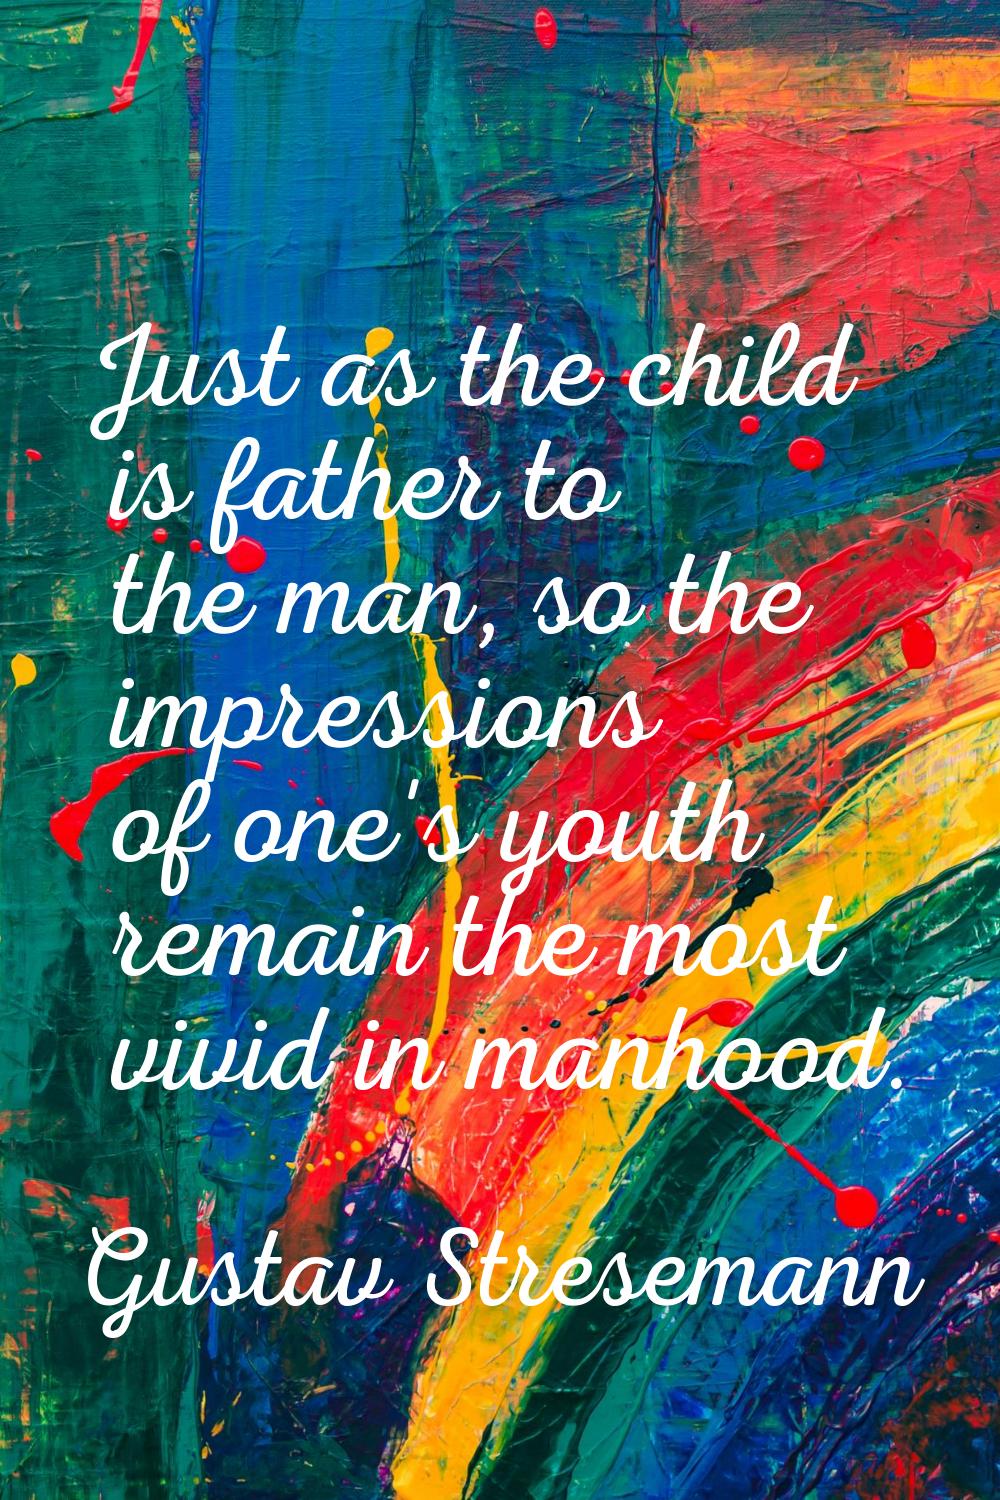 Just as the child is father to the man, so the impressions of one's youth remain the most vivid in 